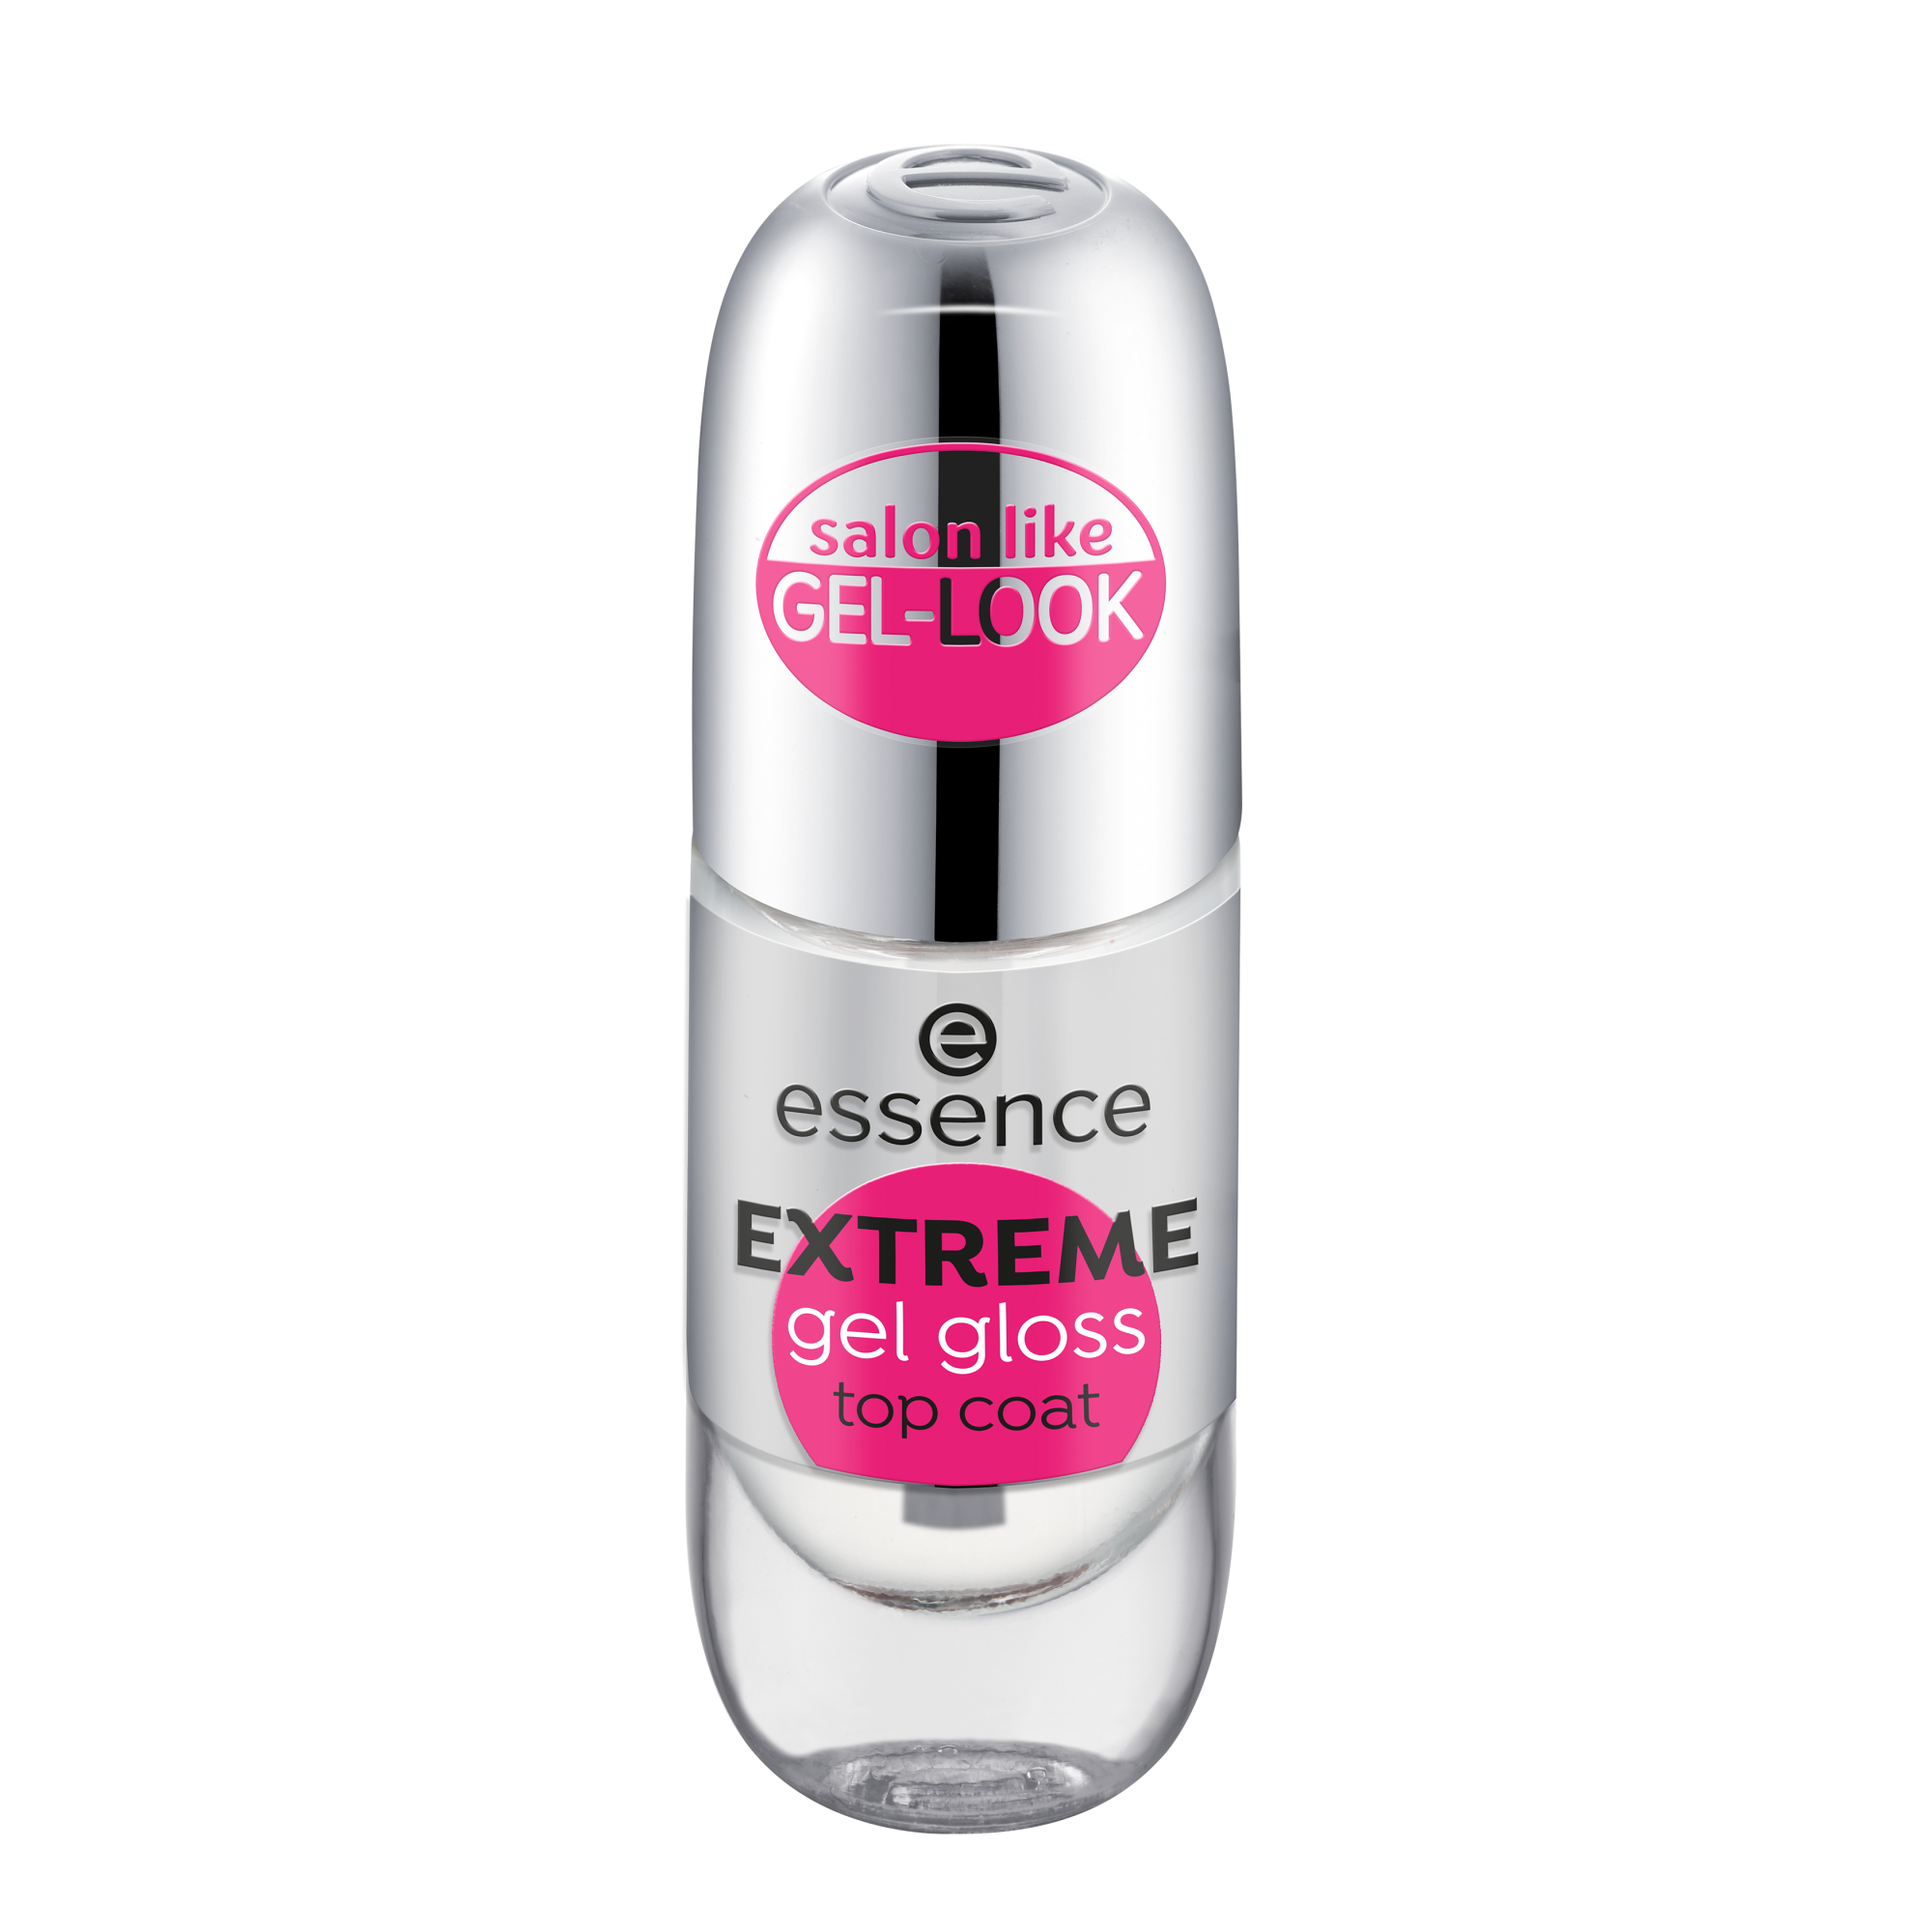 EXTREME gel gloss topcoat